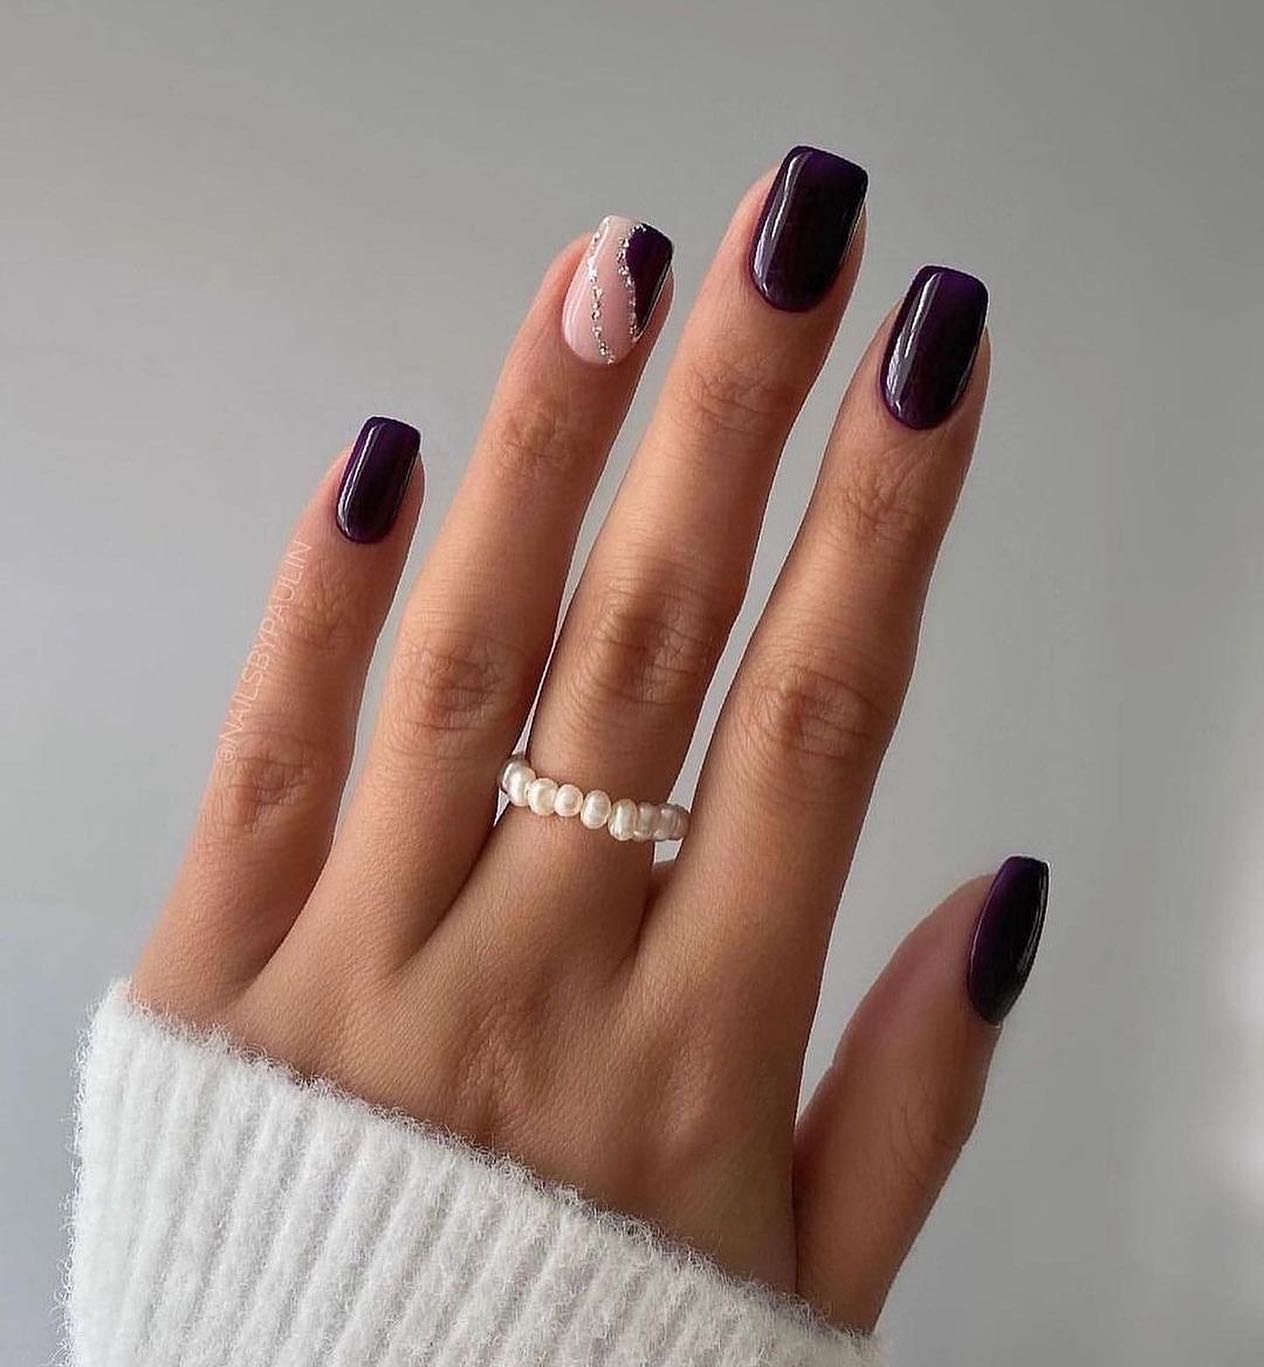 Nail Designs 2023: The Coolest Nail Ideas To Try Now images 40